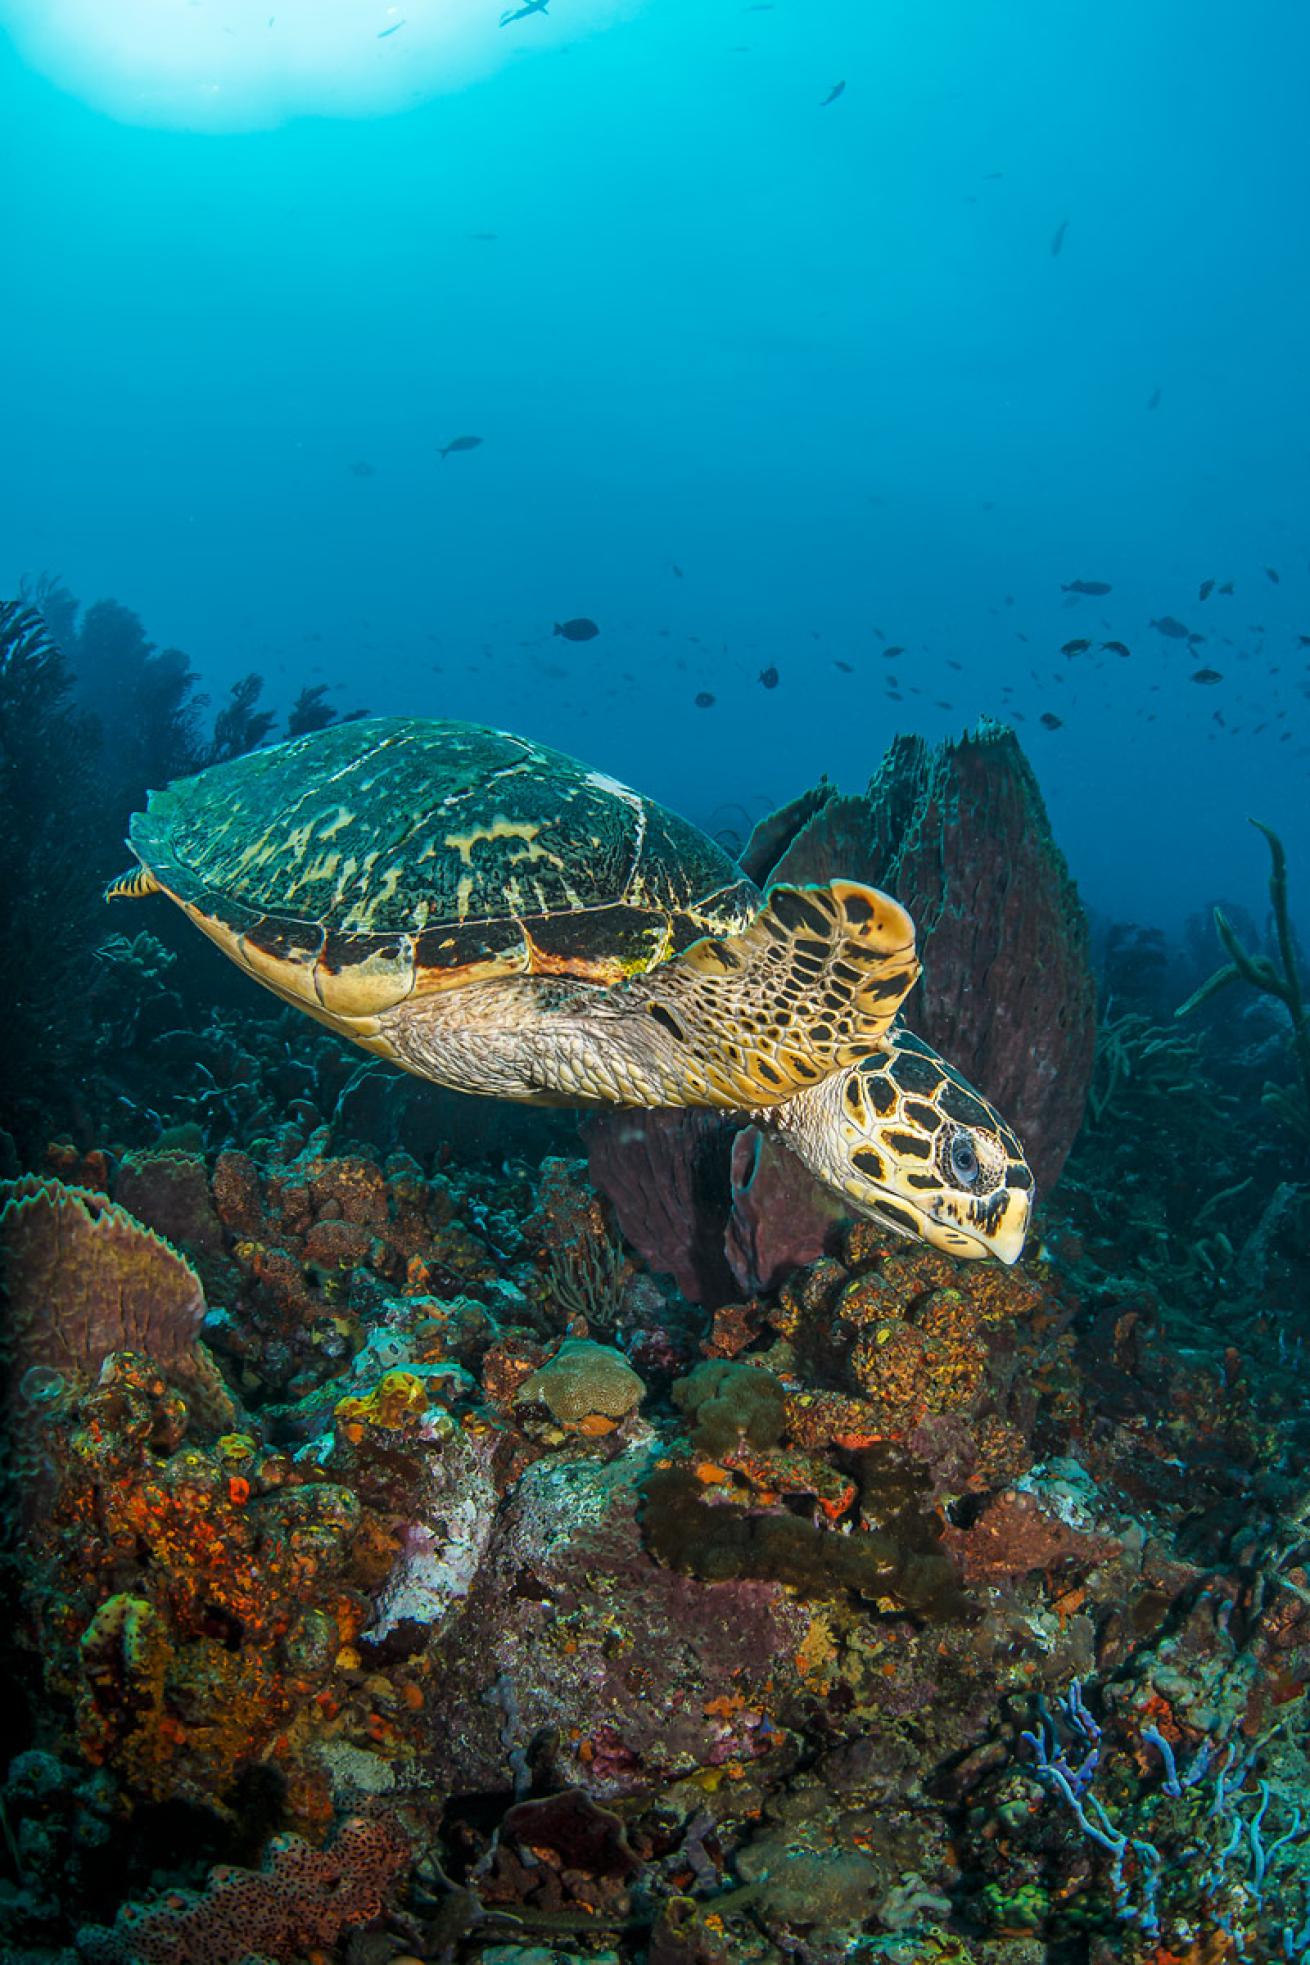  A hawksbill turtle passes through the dive site Coral Gardens.